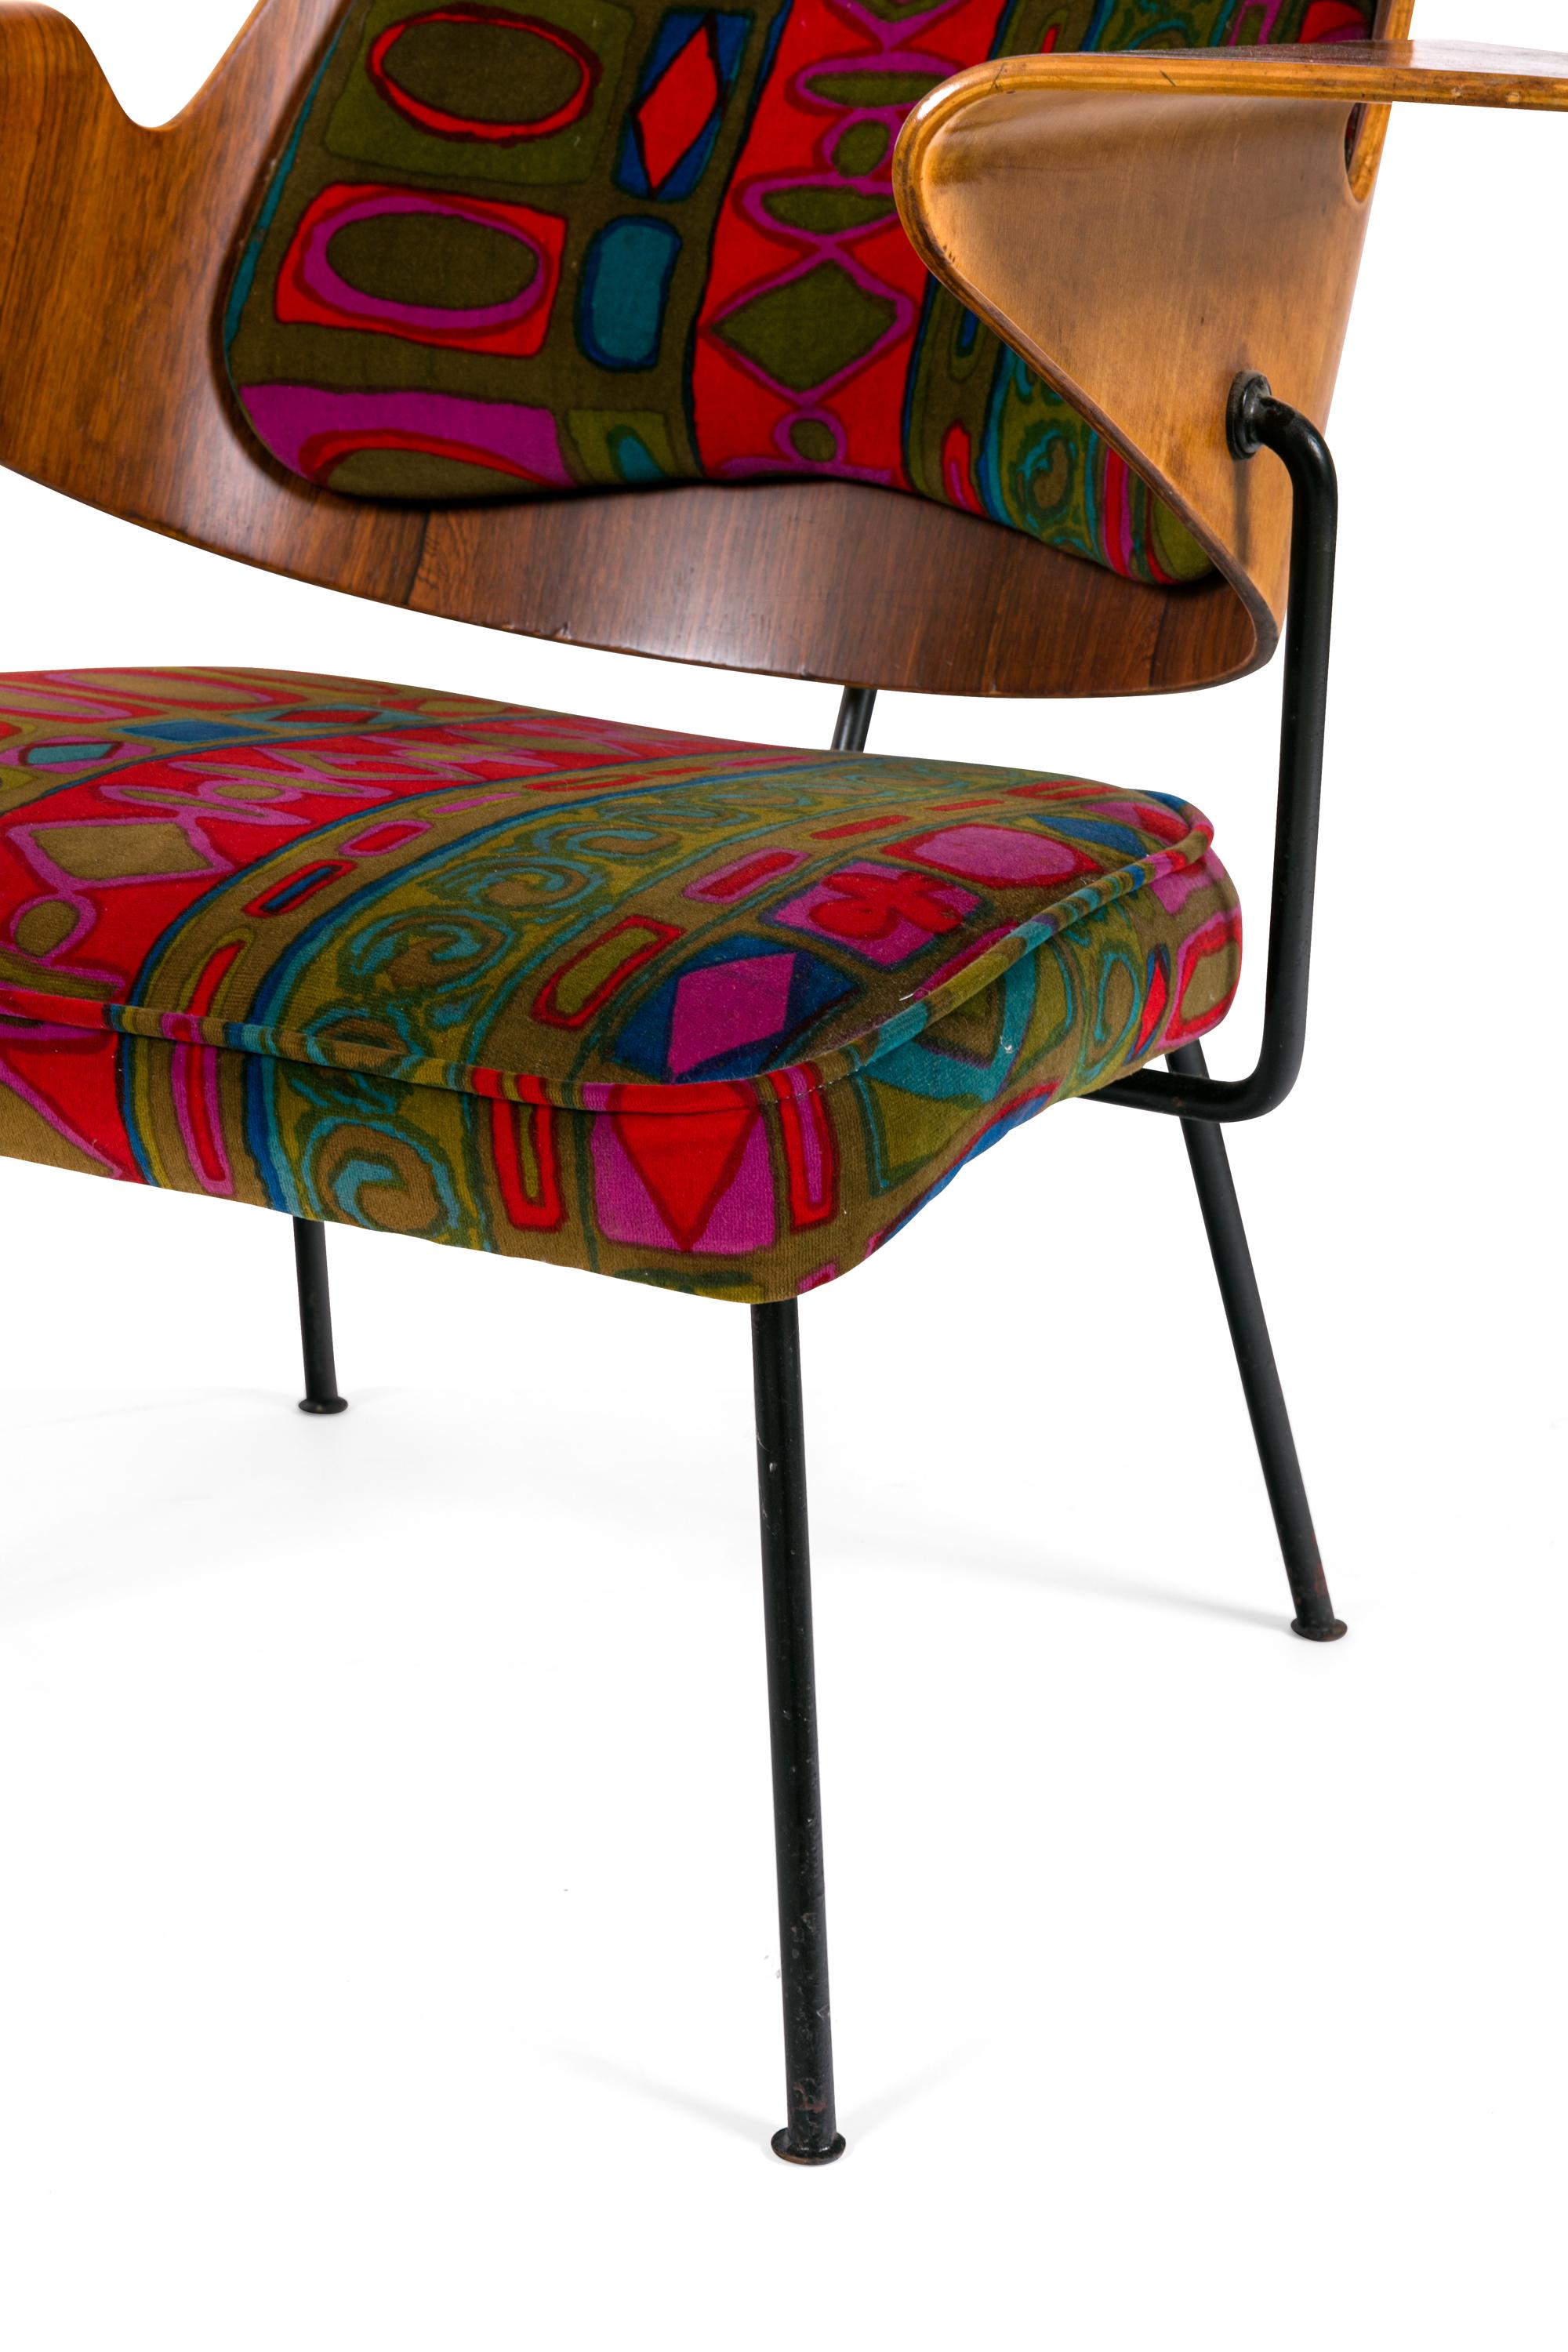 This epitomizes the revolutionary new aesthetic of the post-war style. Its period upholstery, organic sculptural seat back and minimalist frame makes it unlike any chair produced in Britain before.